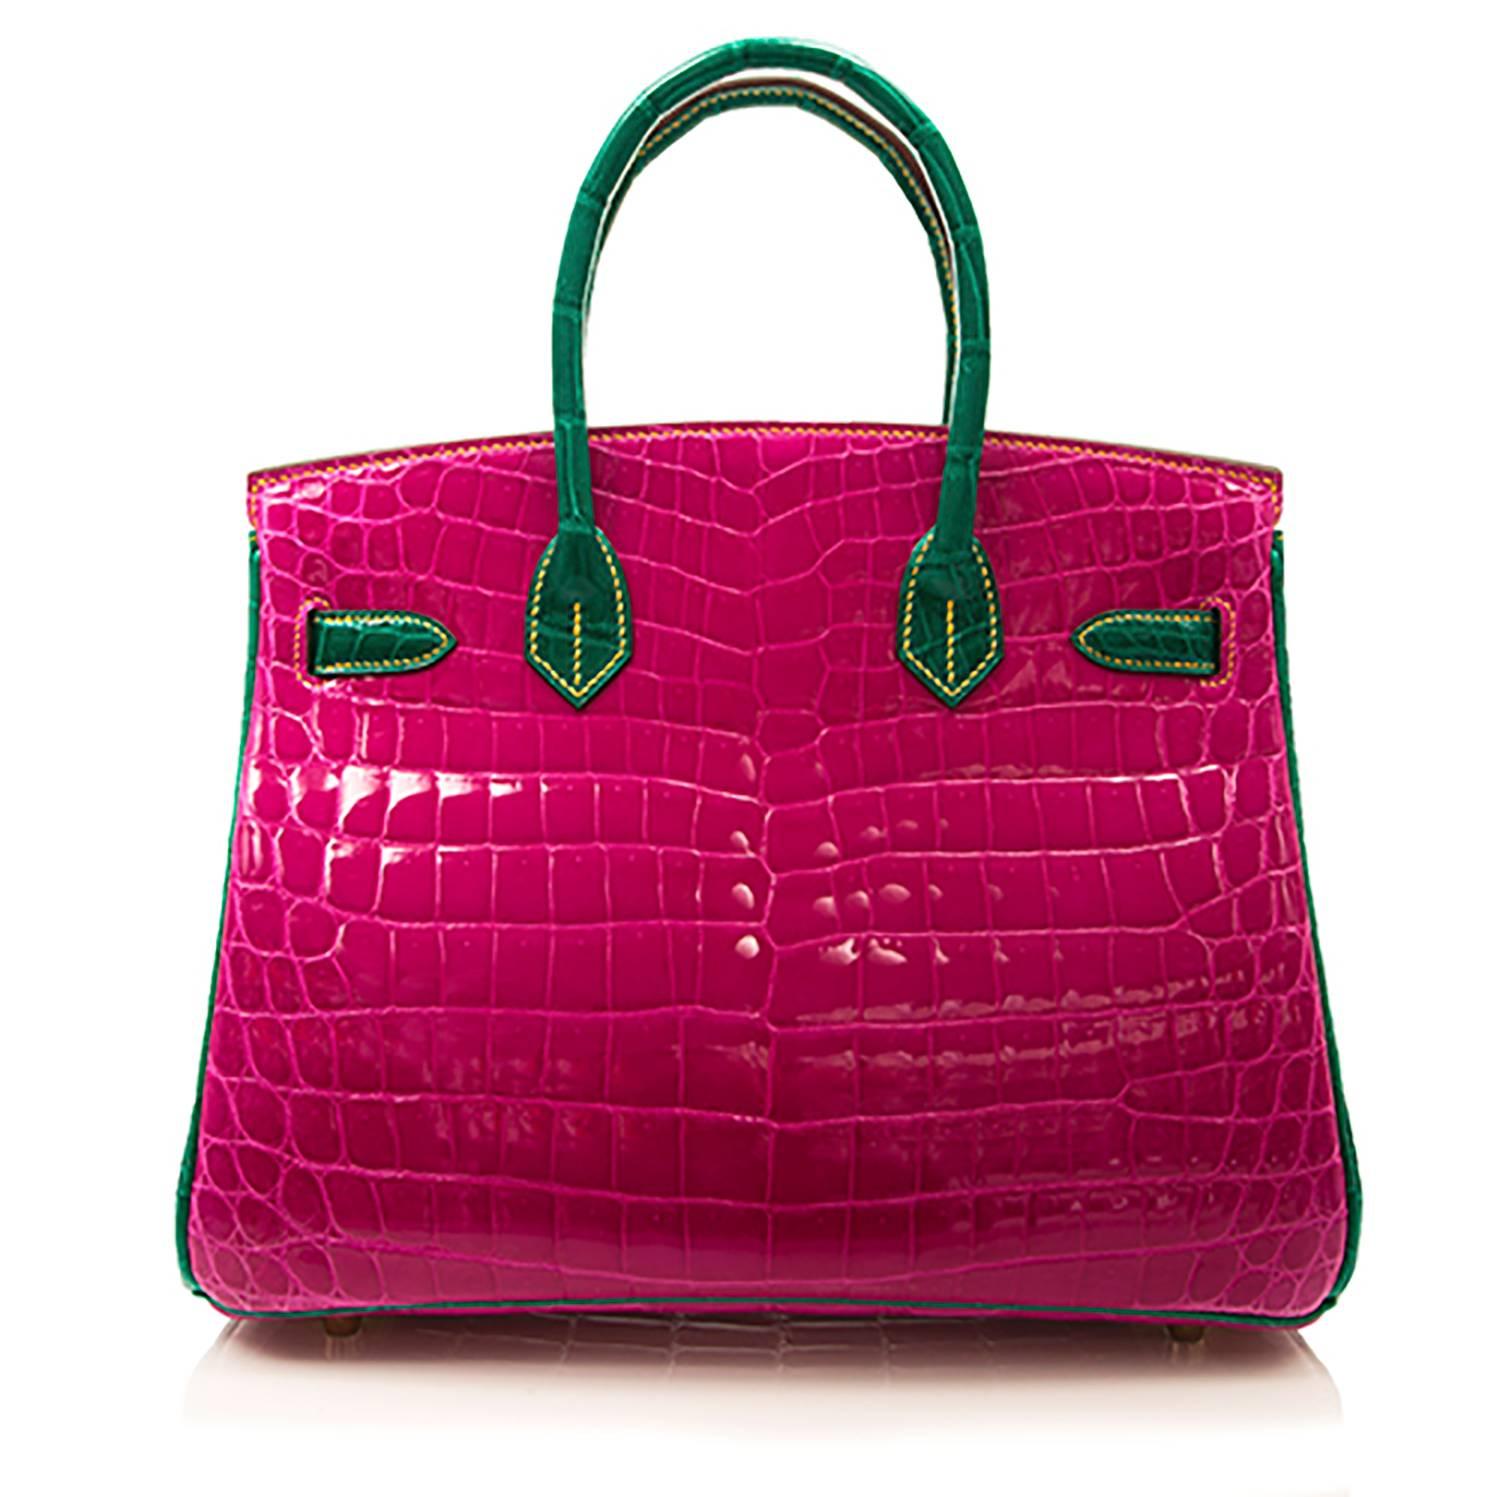 pink and green hermes bag